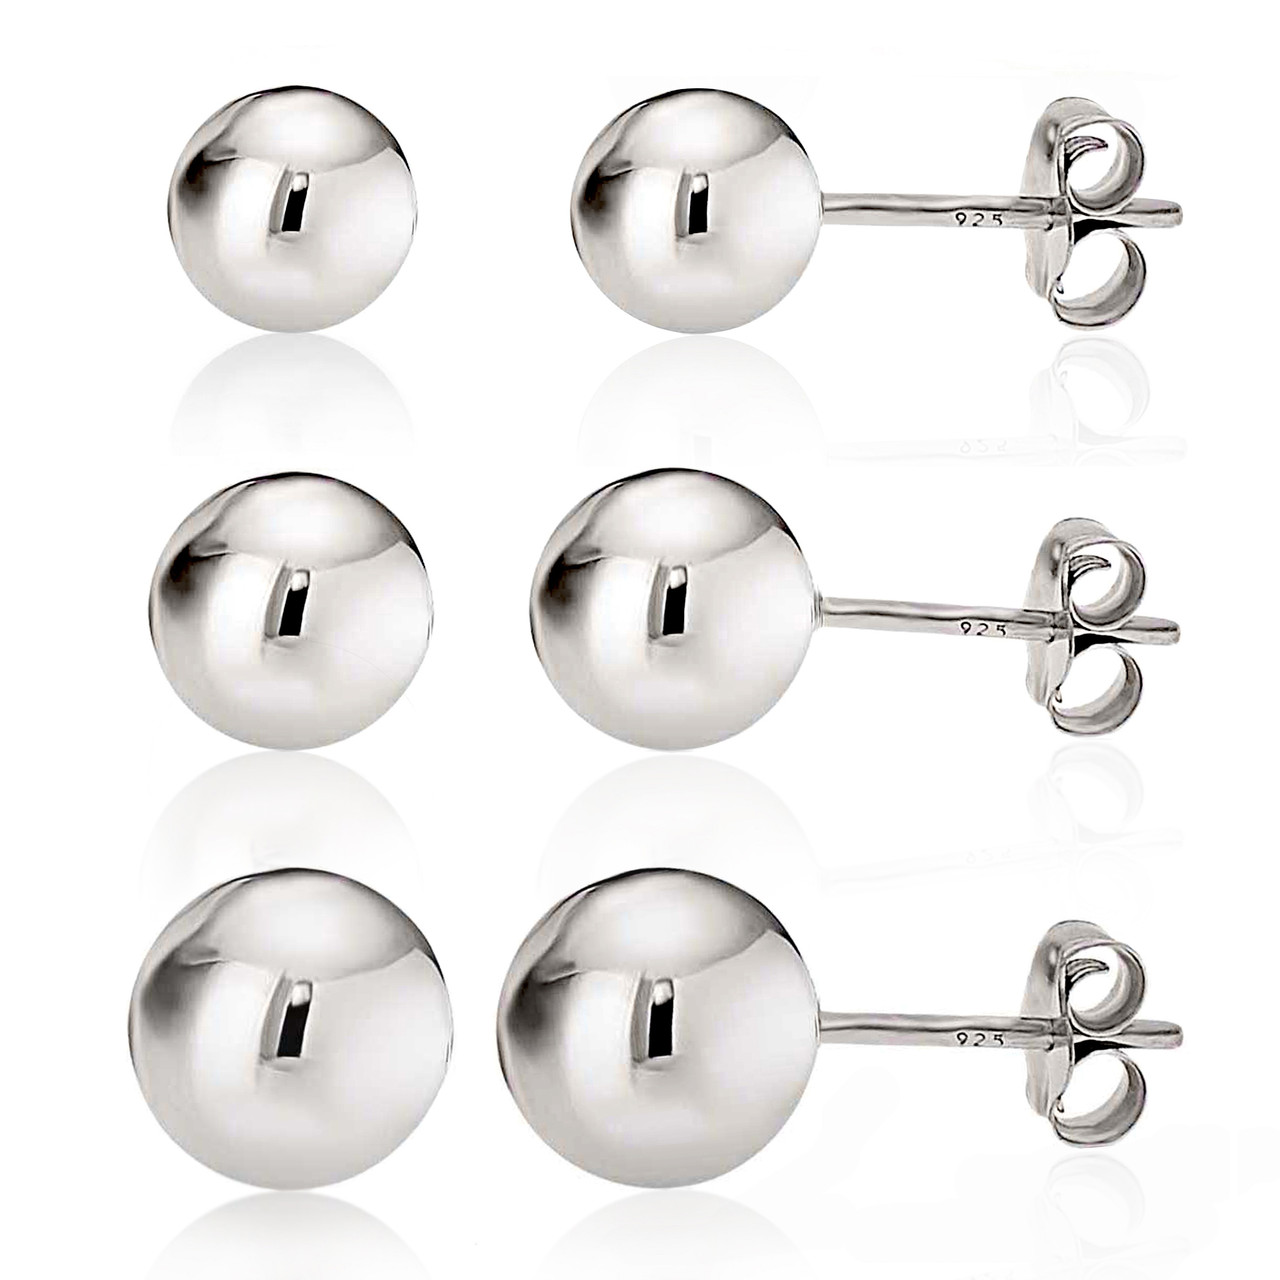  5pcs Adabele Authentic 925 Sterling Silver 8mm Round